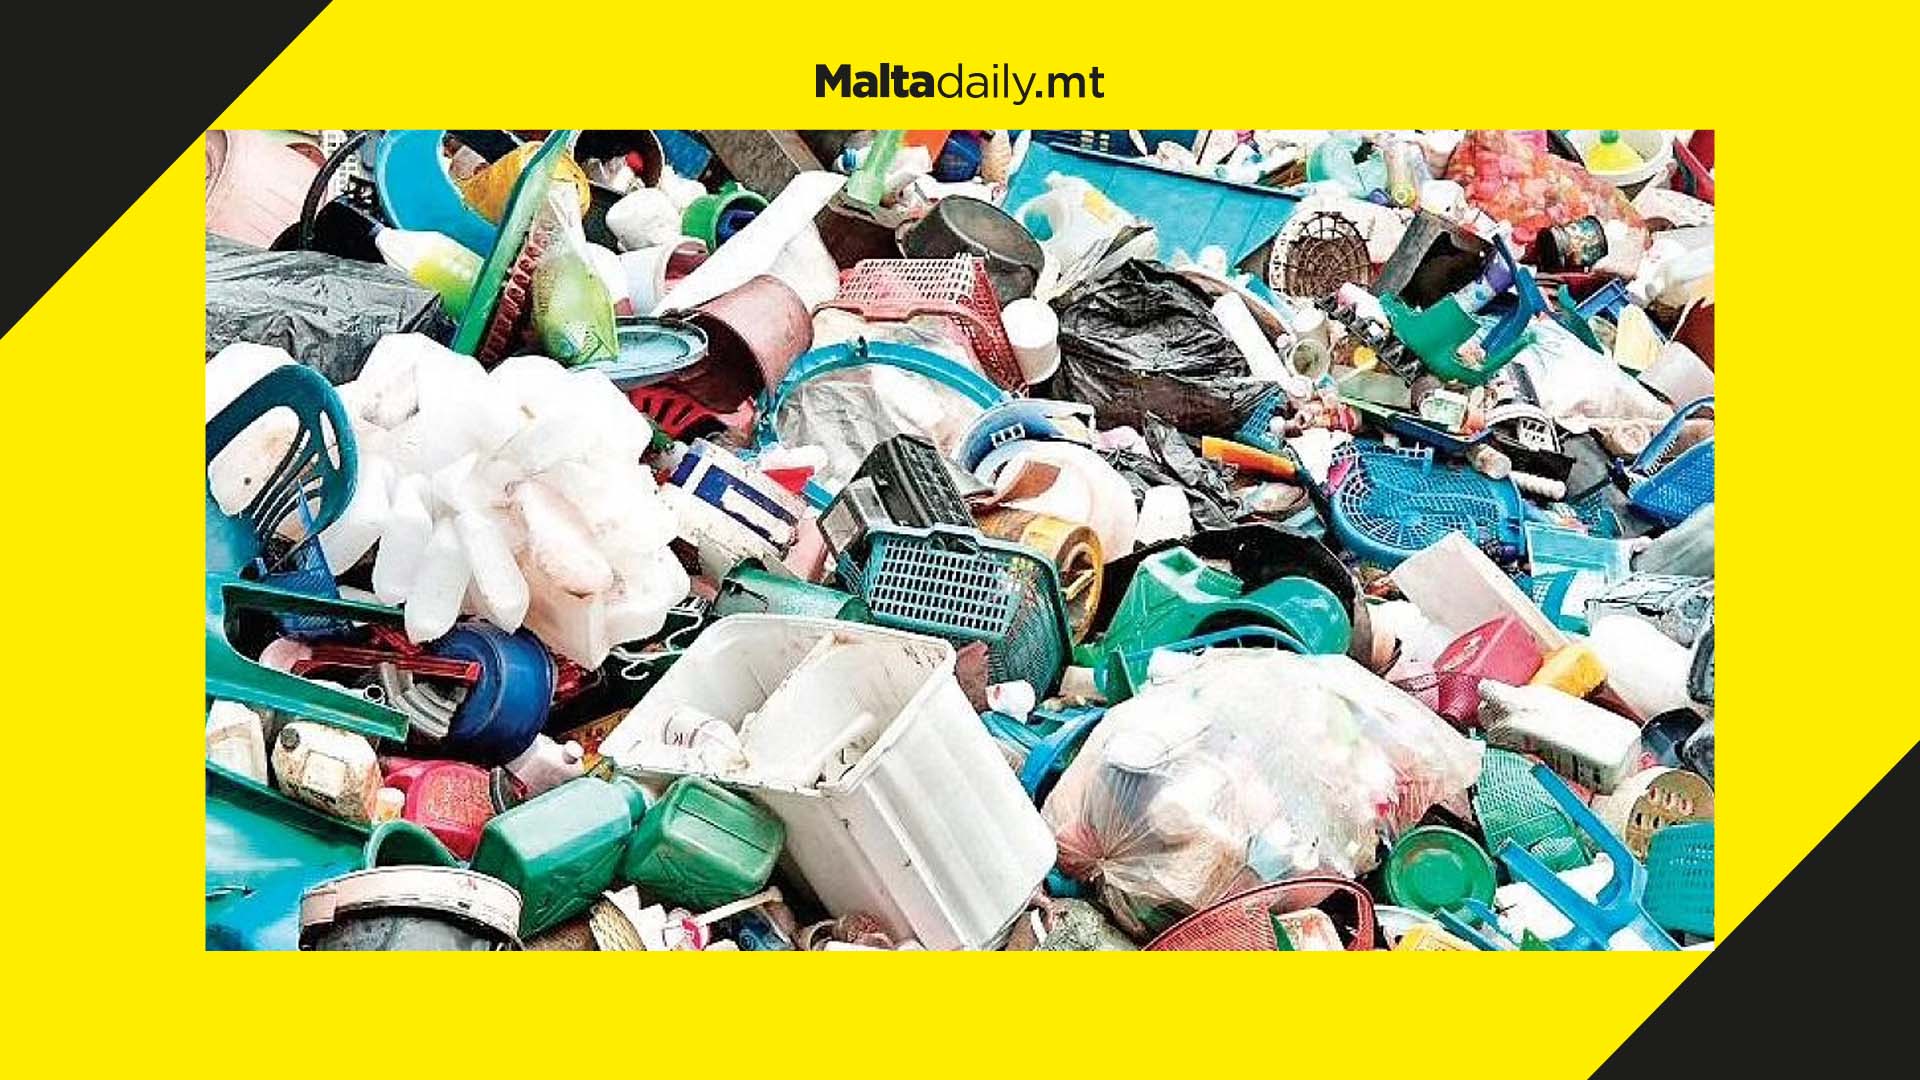 Solid waste decreased by around 20% in 2020 in Malta